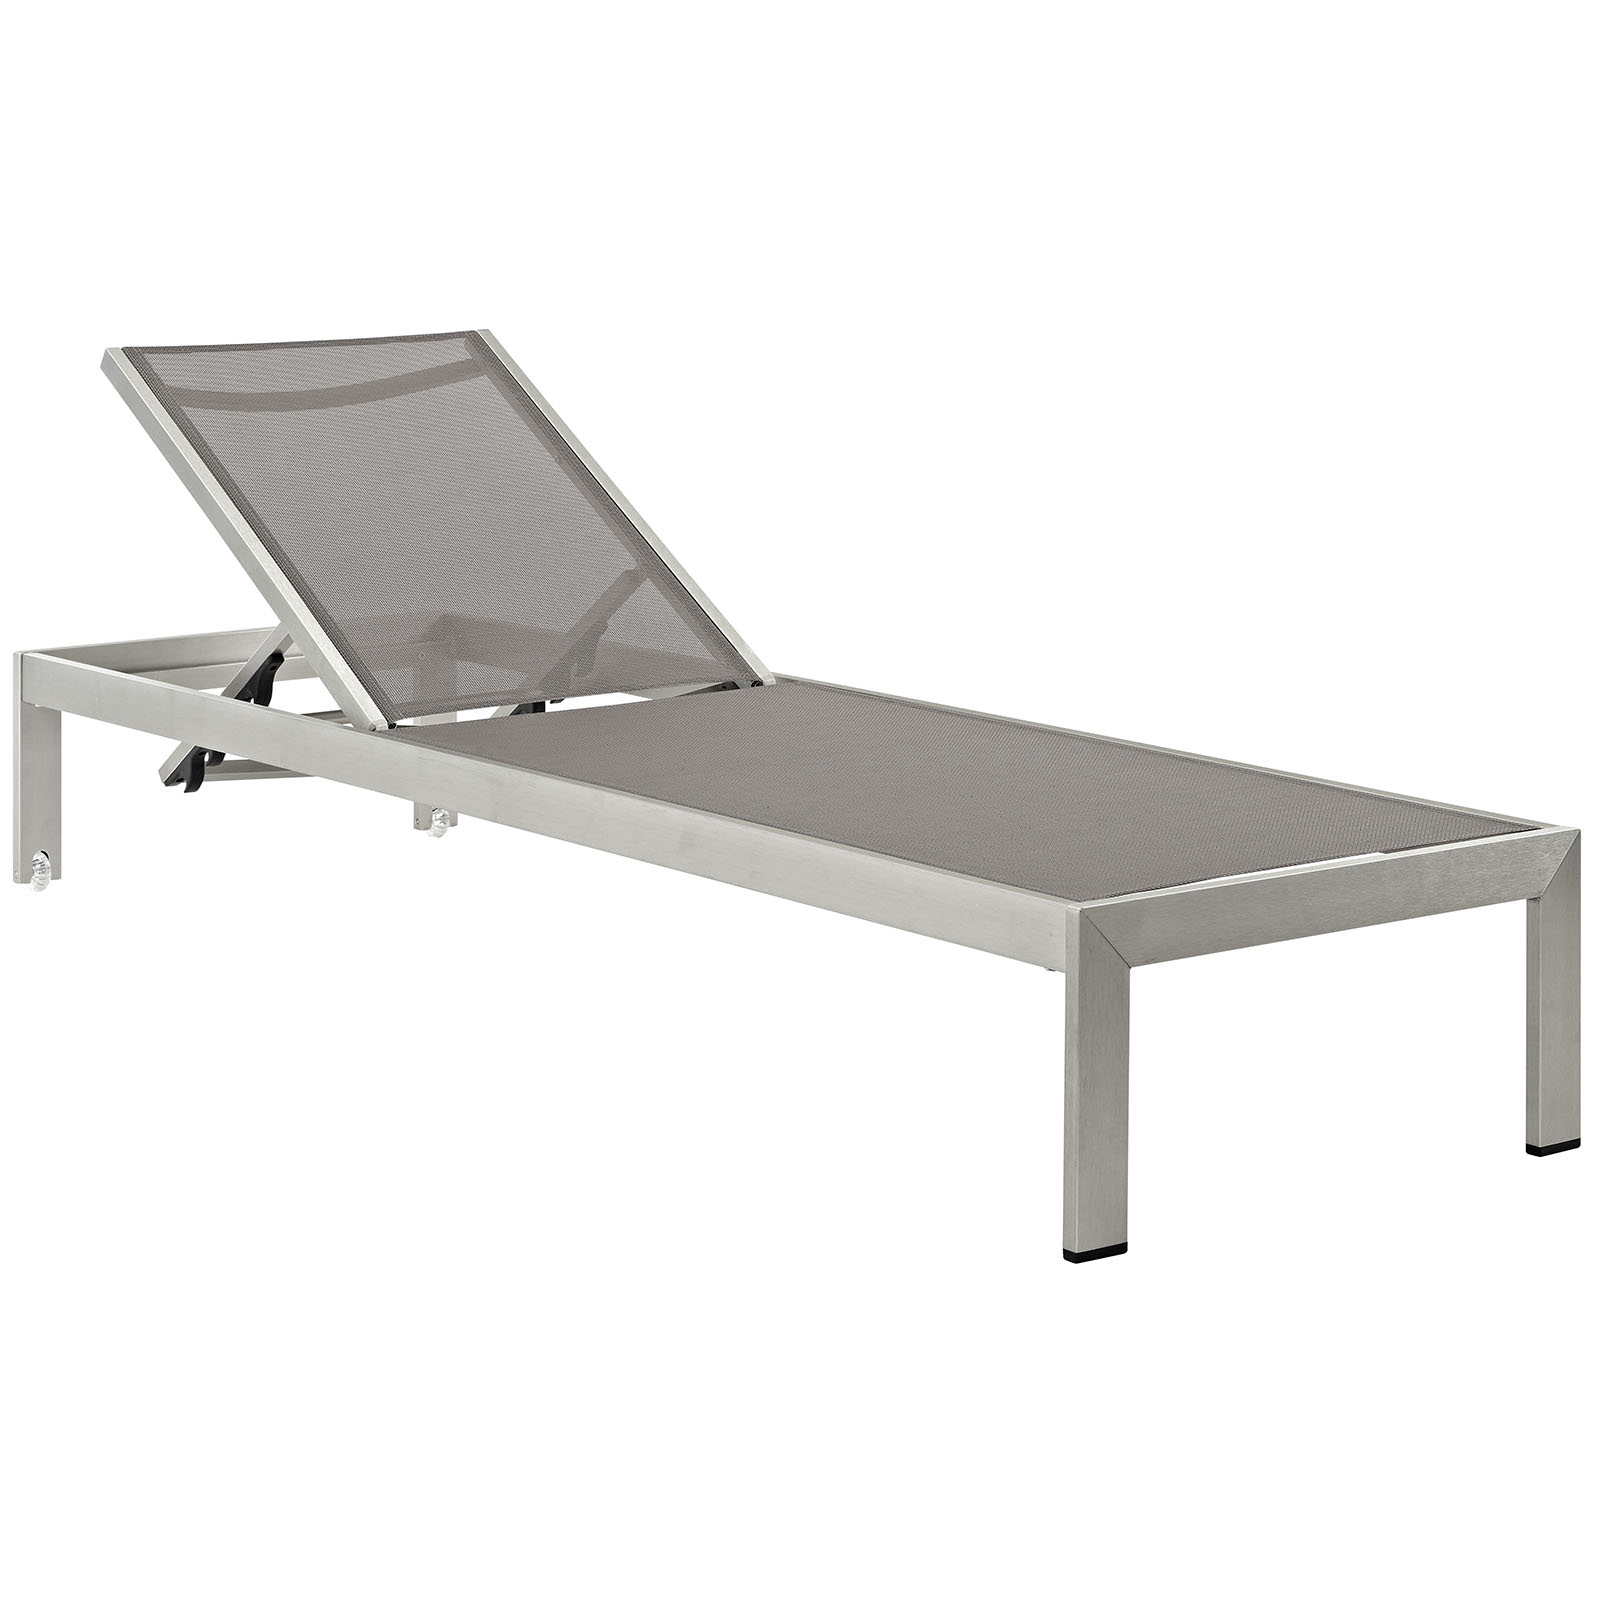 Modern Contemporary Urban Outdoor Patio Balcony Garden Furniture Lounge Chair Chaise and Side Table Set, Aluminum Metal Steel, Grey Gray - image 3 of 7